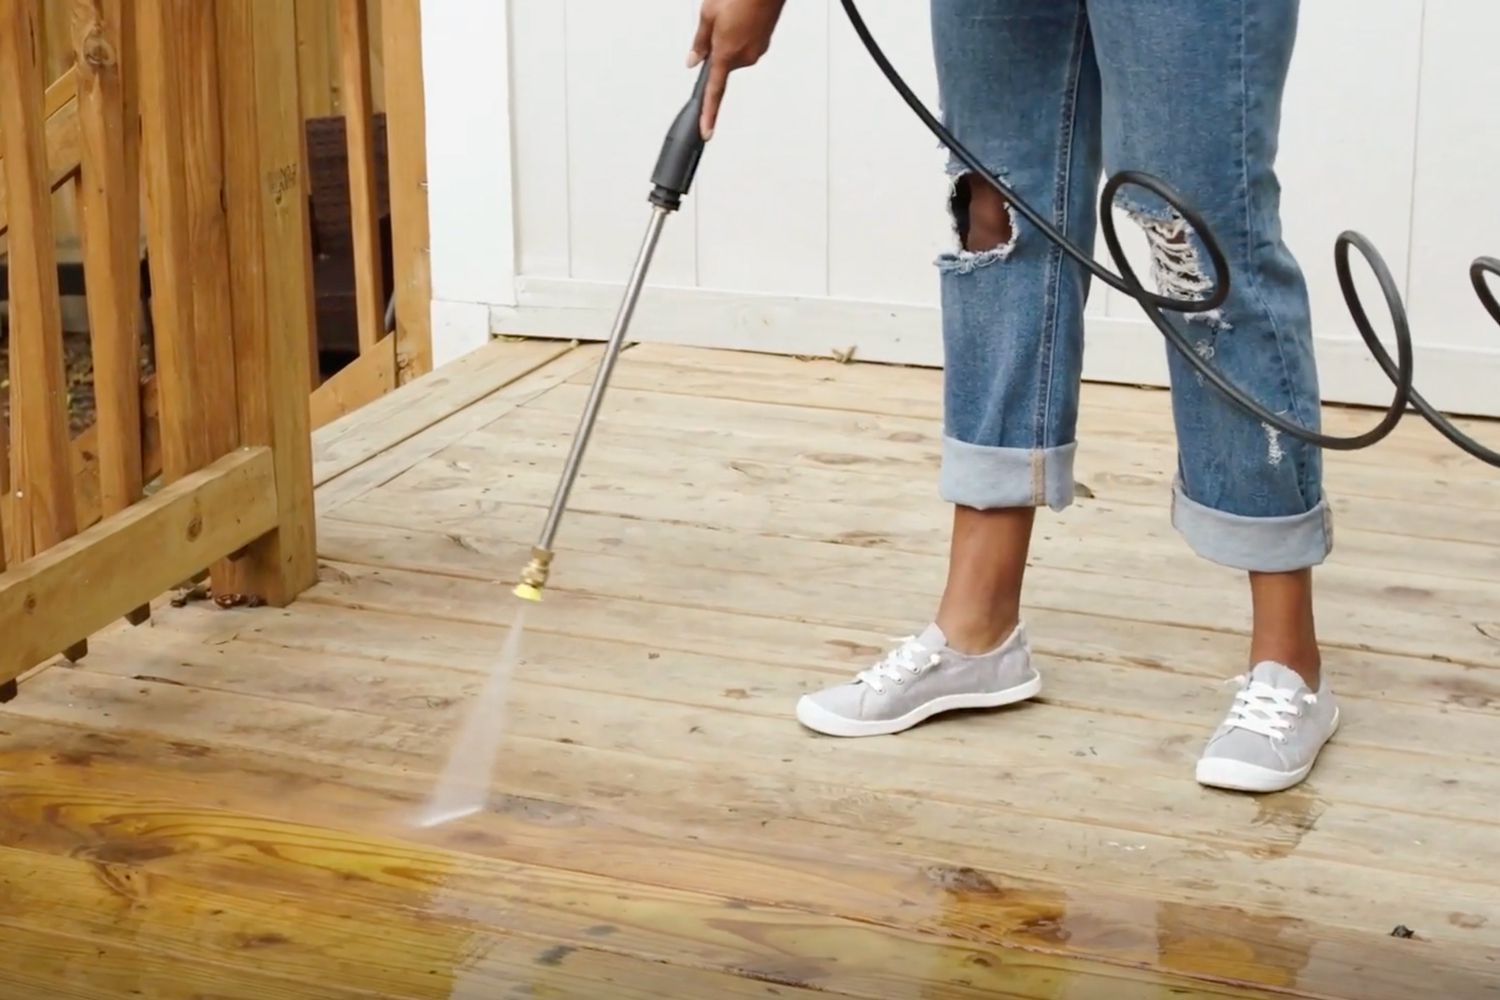 person power washing a wood deck